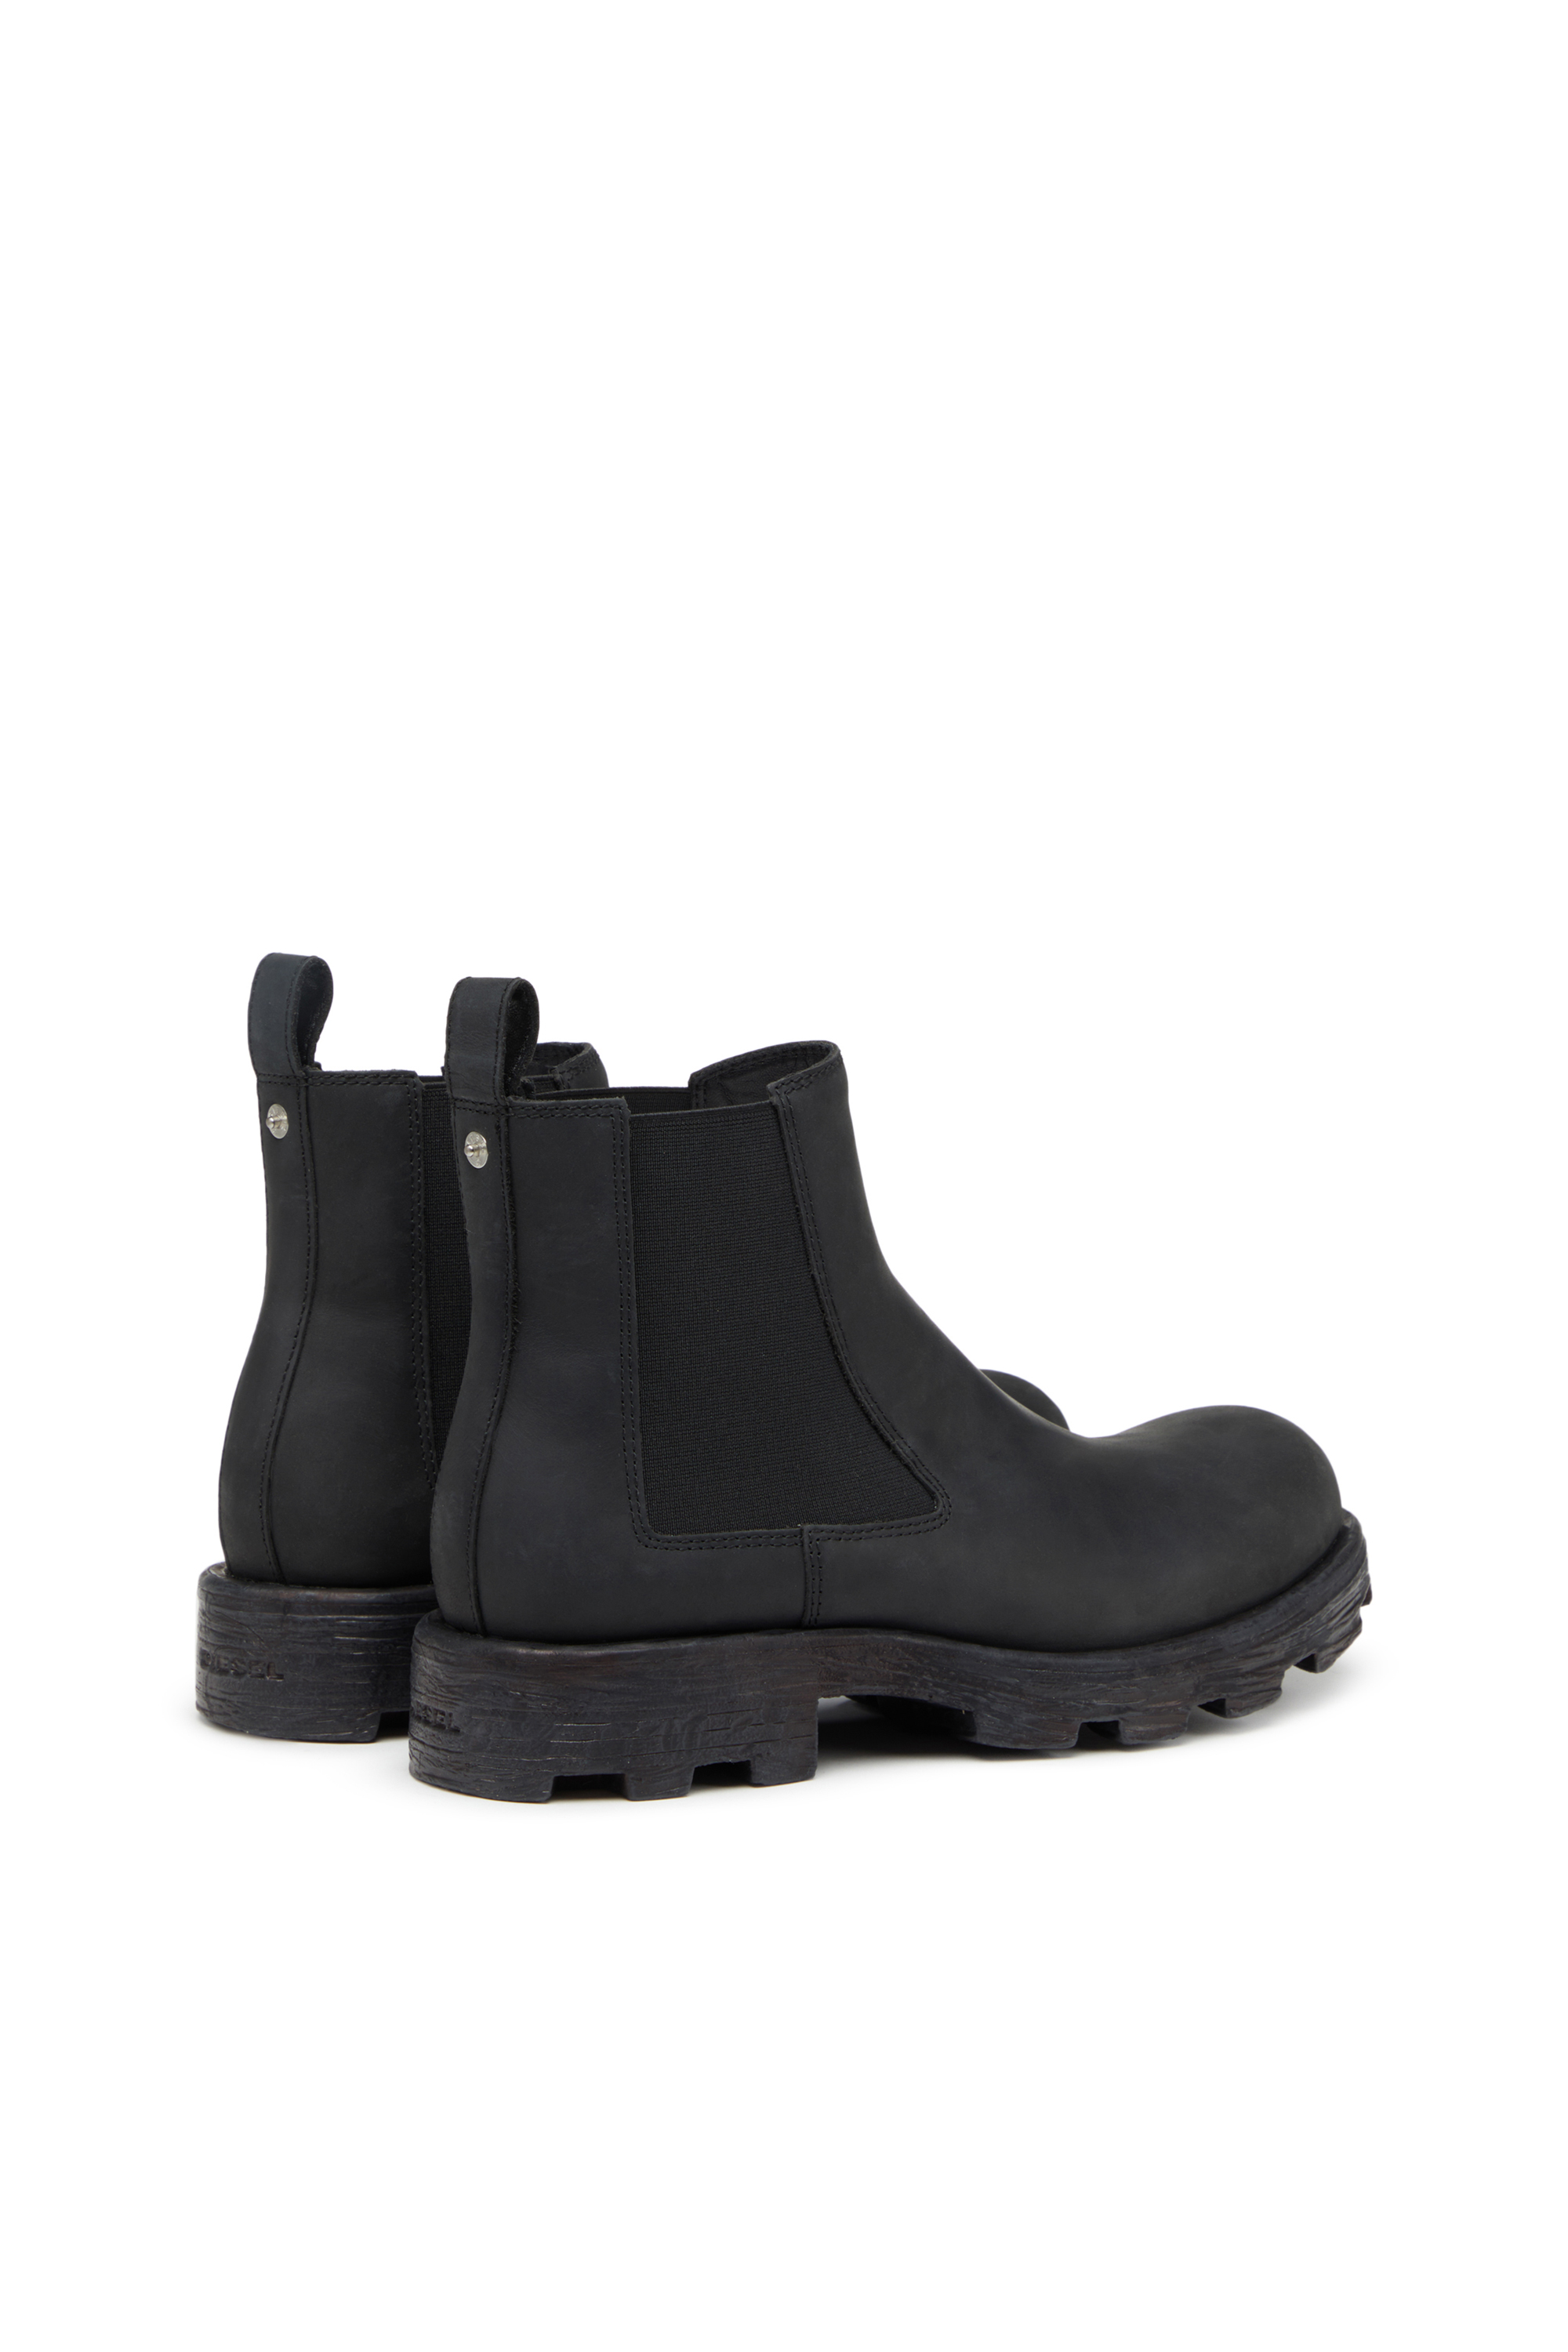 Diesel - D-HAMMER LCH, Man D-Hammer LCH - Chelsea boots in waxed nubuck leather in Black - Image 3